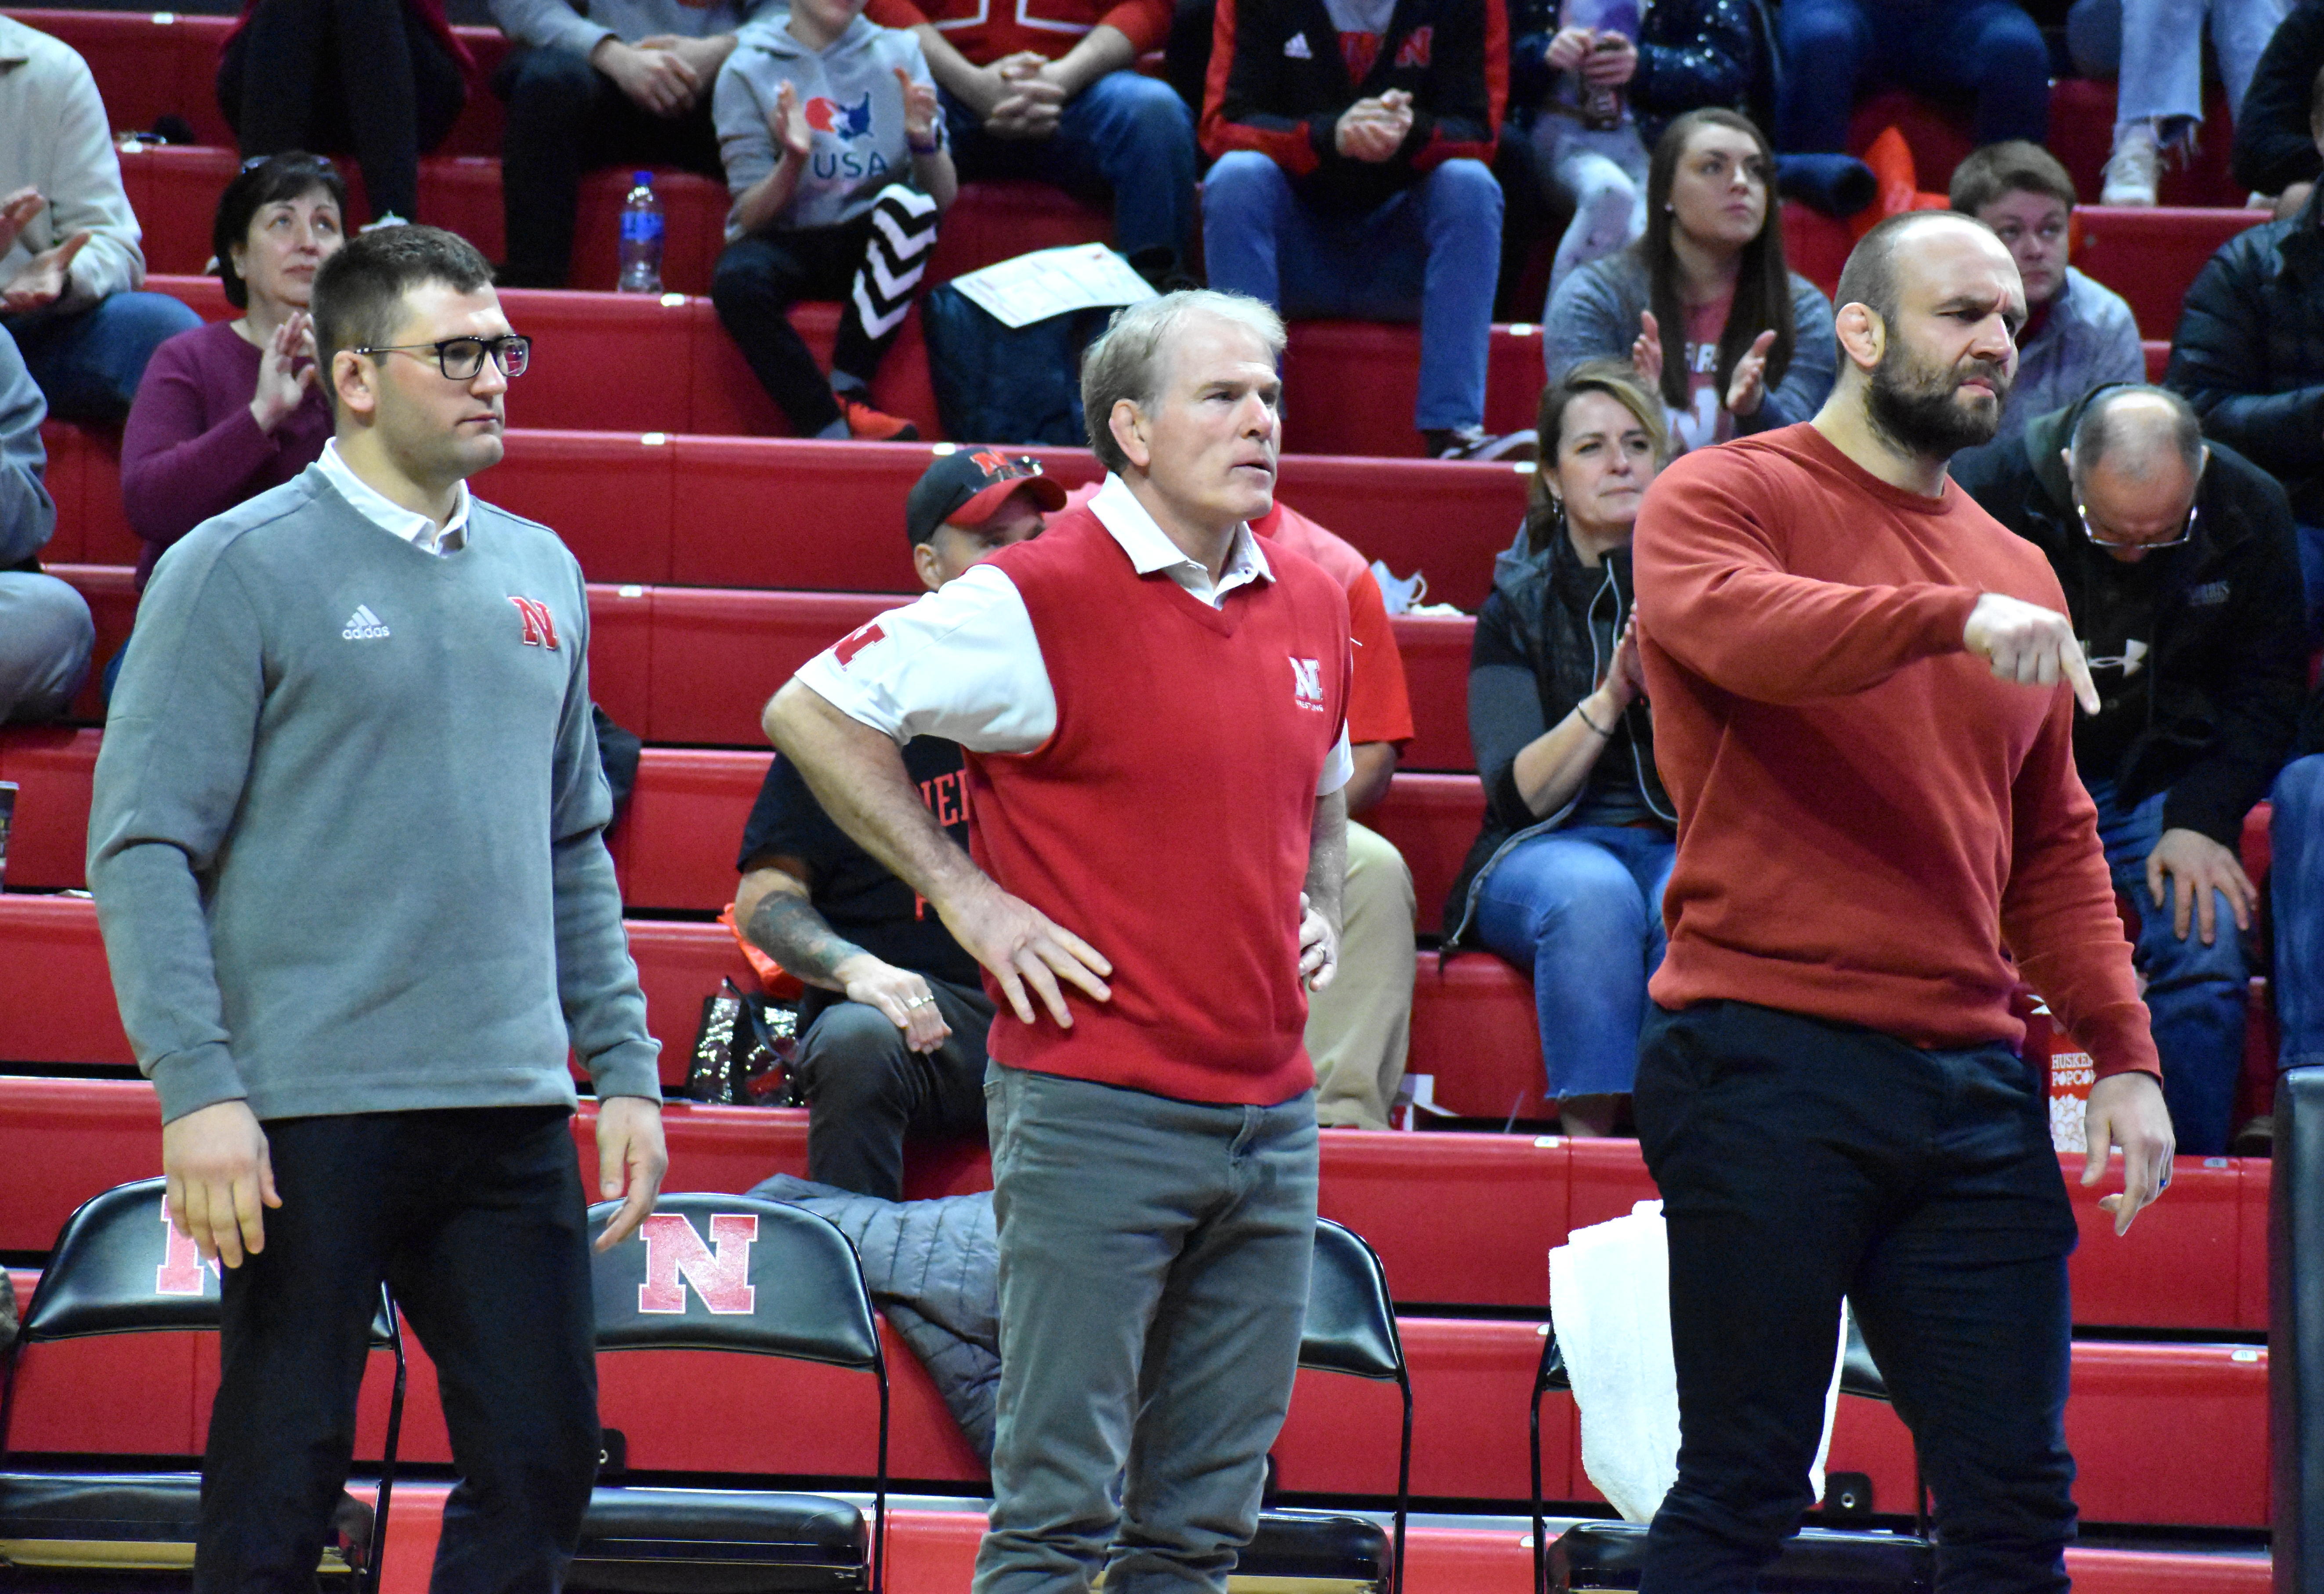 Nebraska Head Coach Mark Manning (middle), volunteer assistant Tervel Dlagnev (right), and assistant coach Robert Kokesh (left) look on during a dual against Illinois on Feb. 13, 2022 at the Bob Devaney Sports Center.